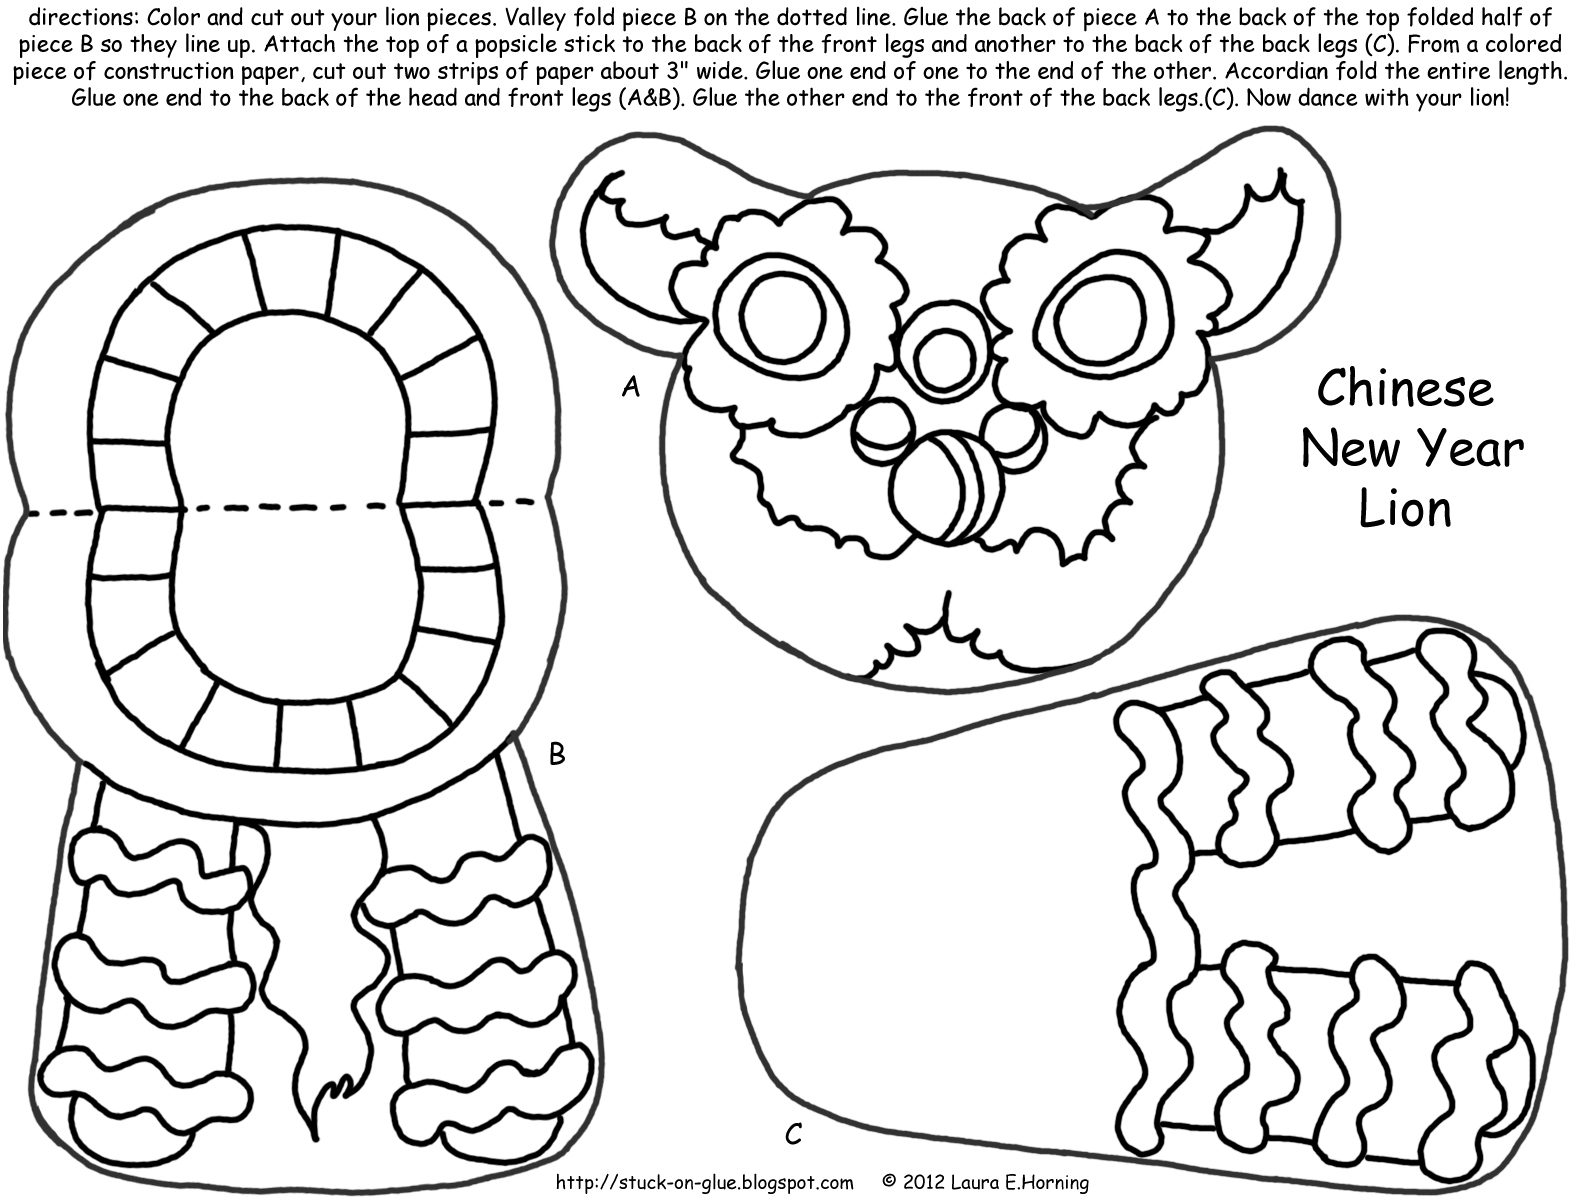 lion-dance-coloring-page-at-getdrawings-free-download